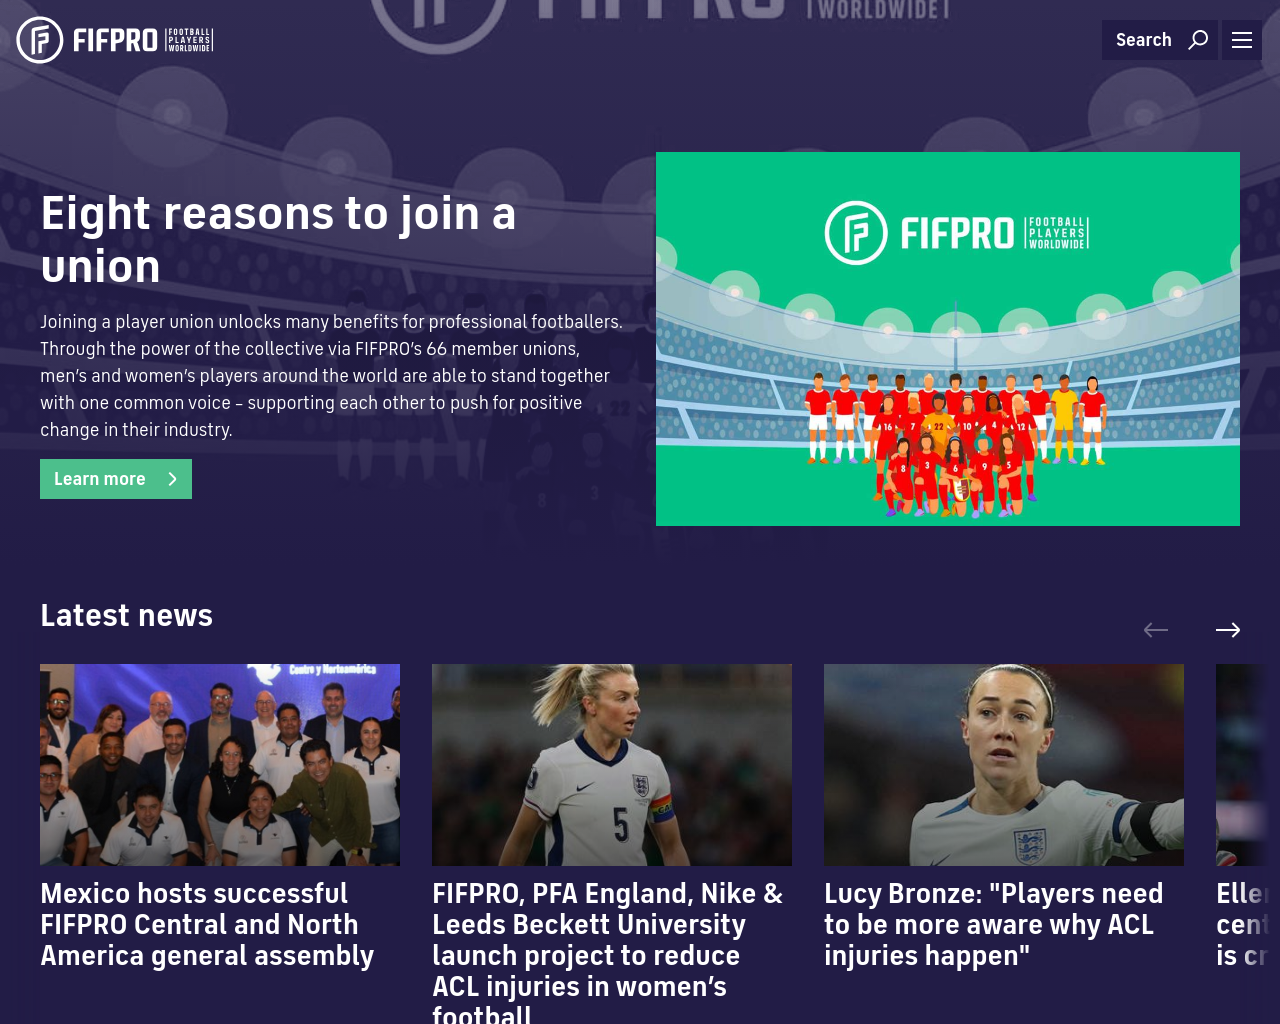 fifpro.org